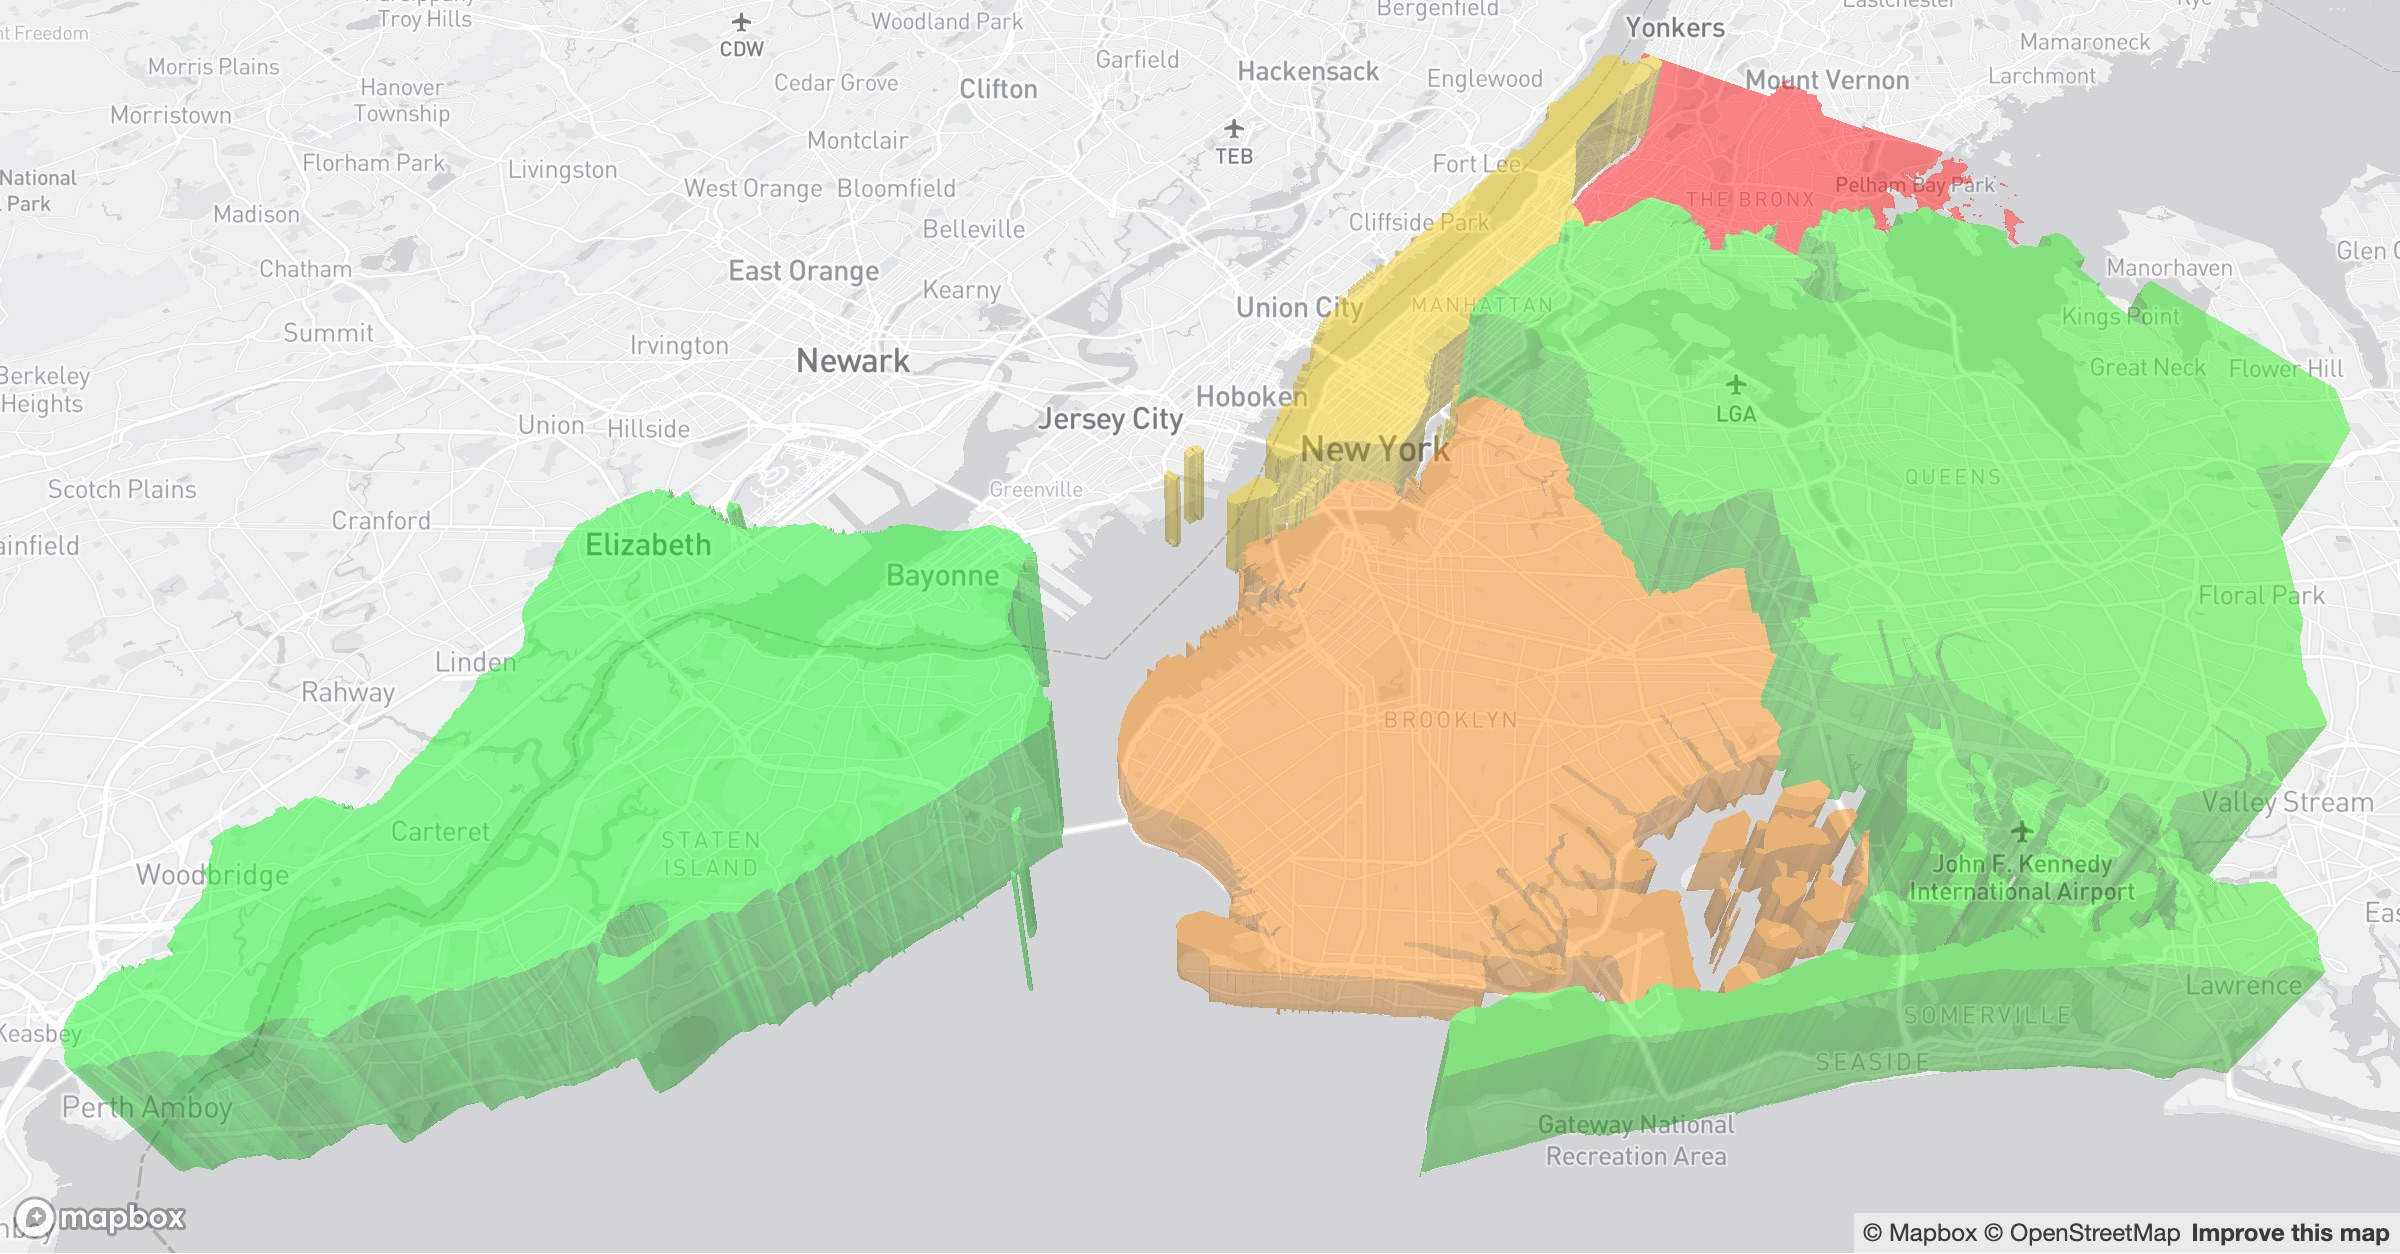 map showing internet speeds by Borough in NYC.